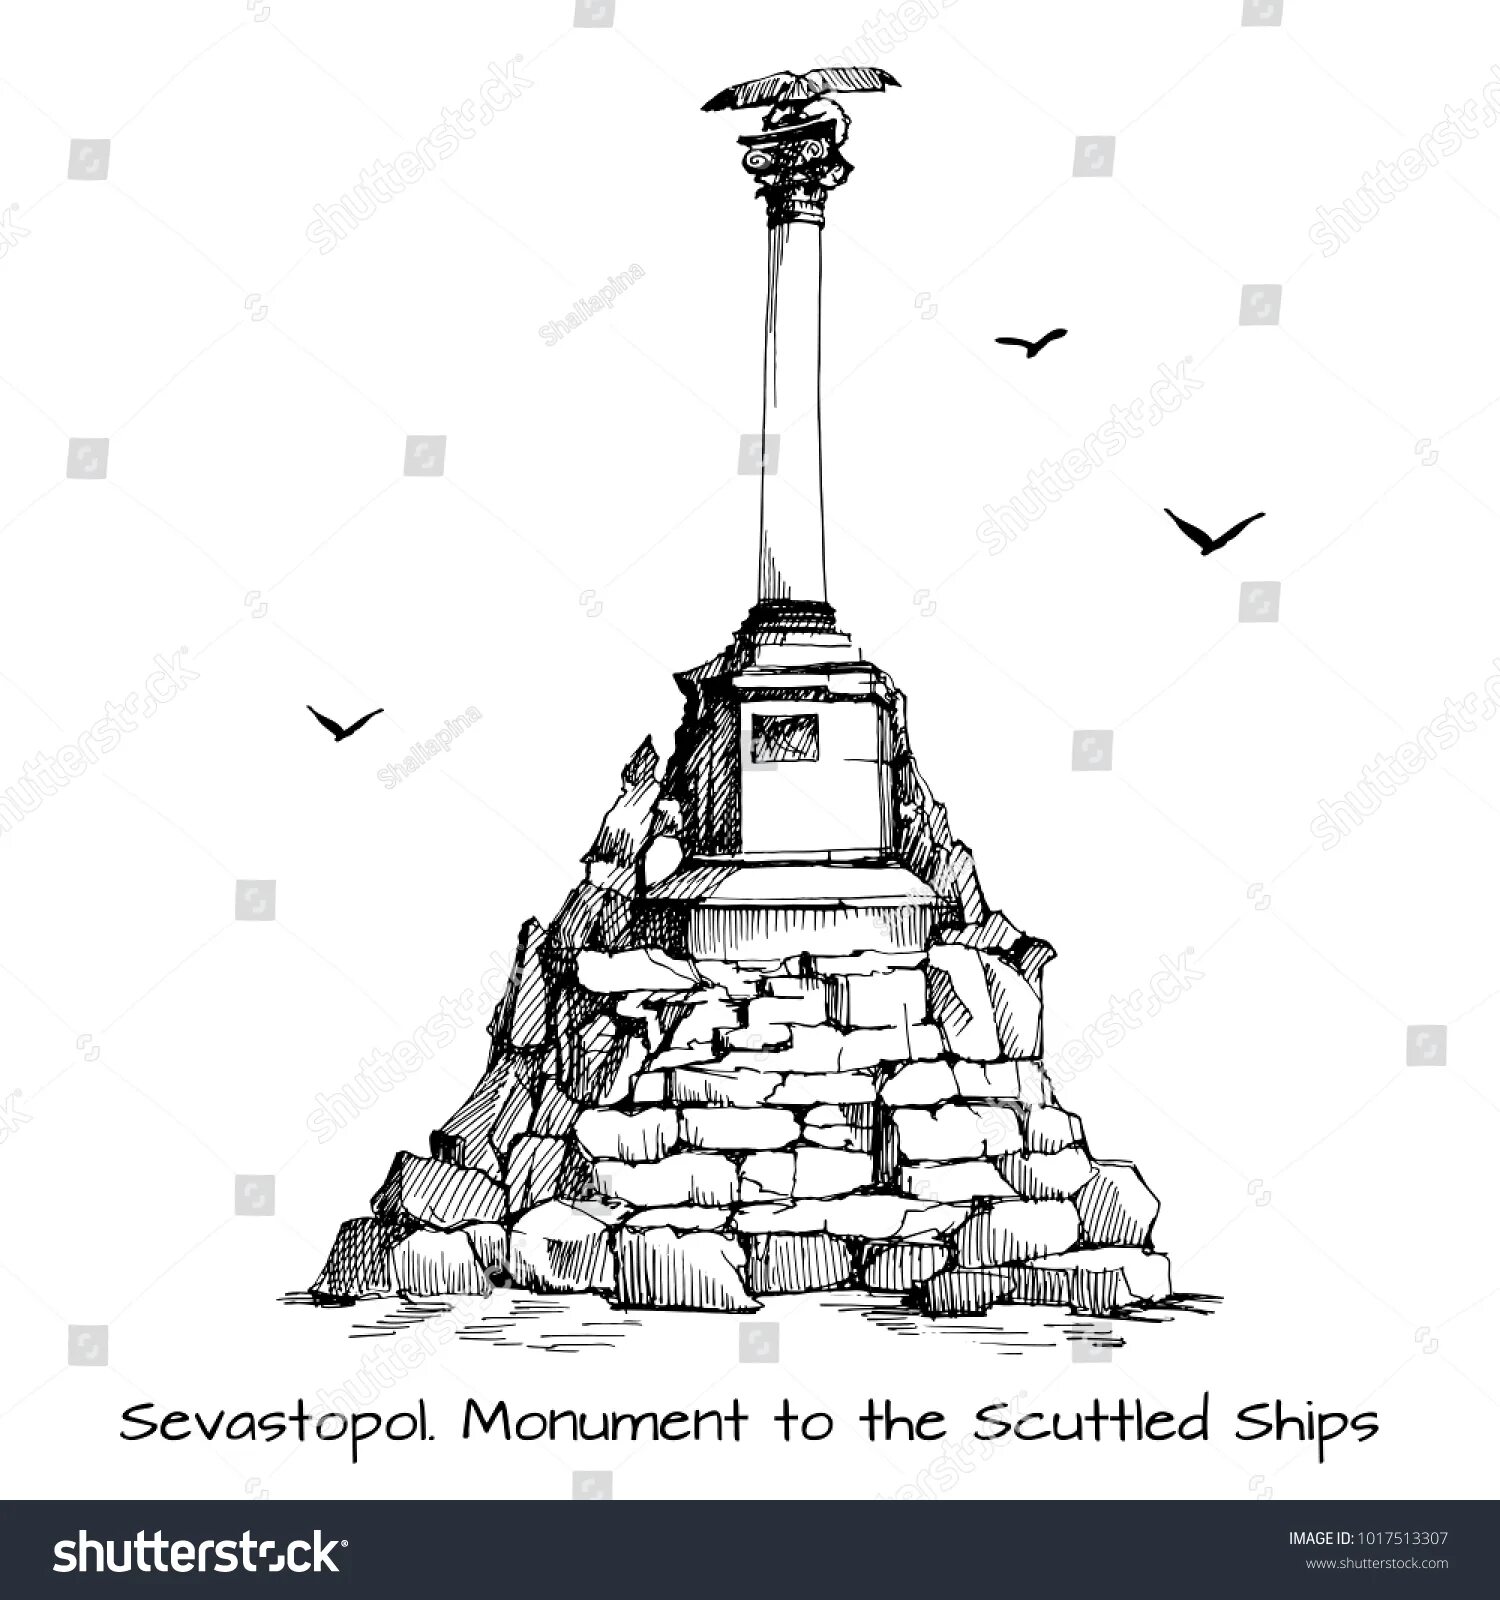 Scuttled Ships Monument #34